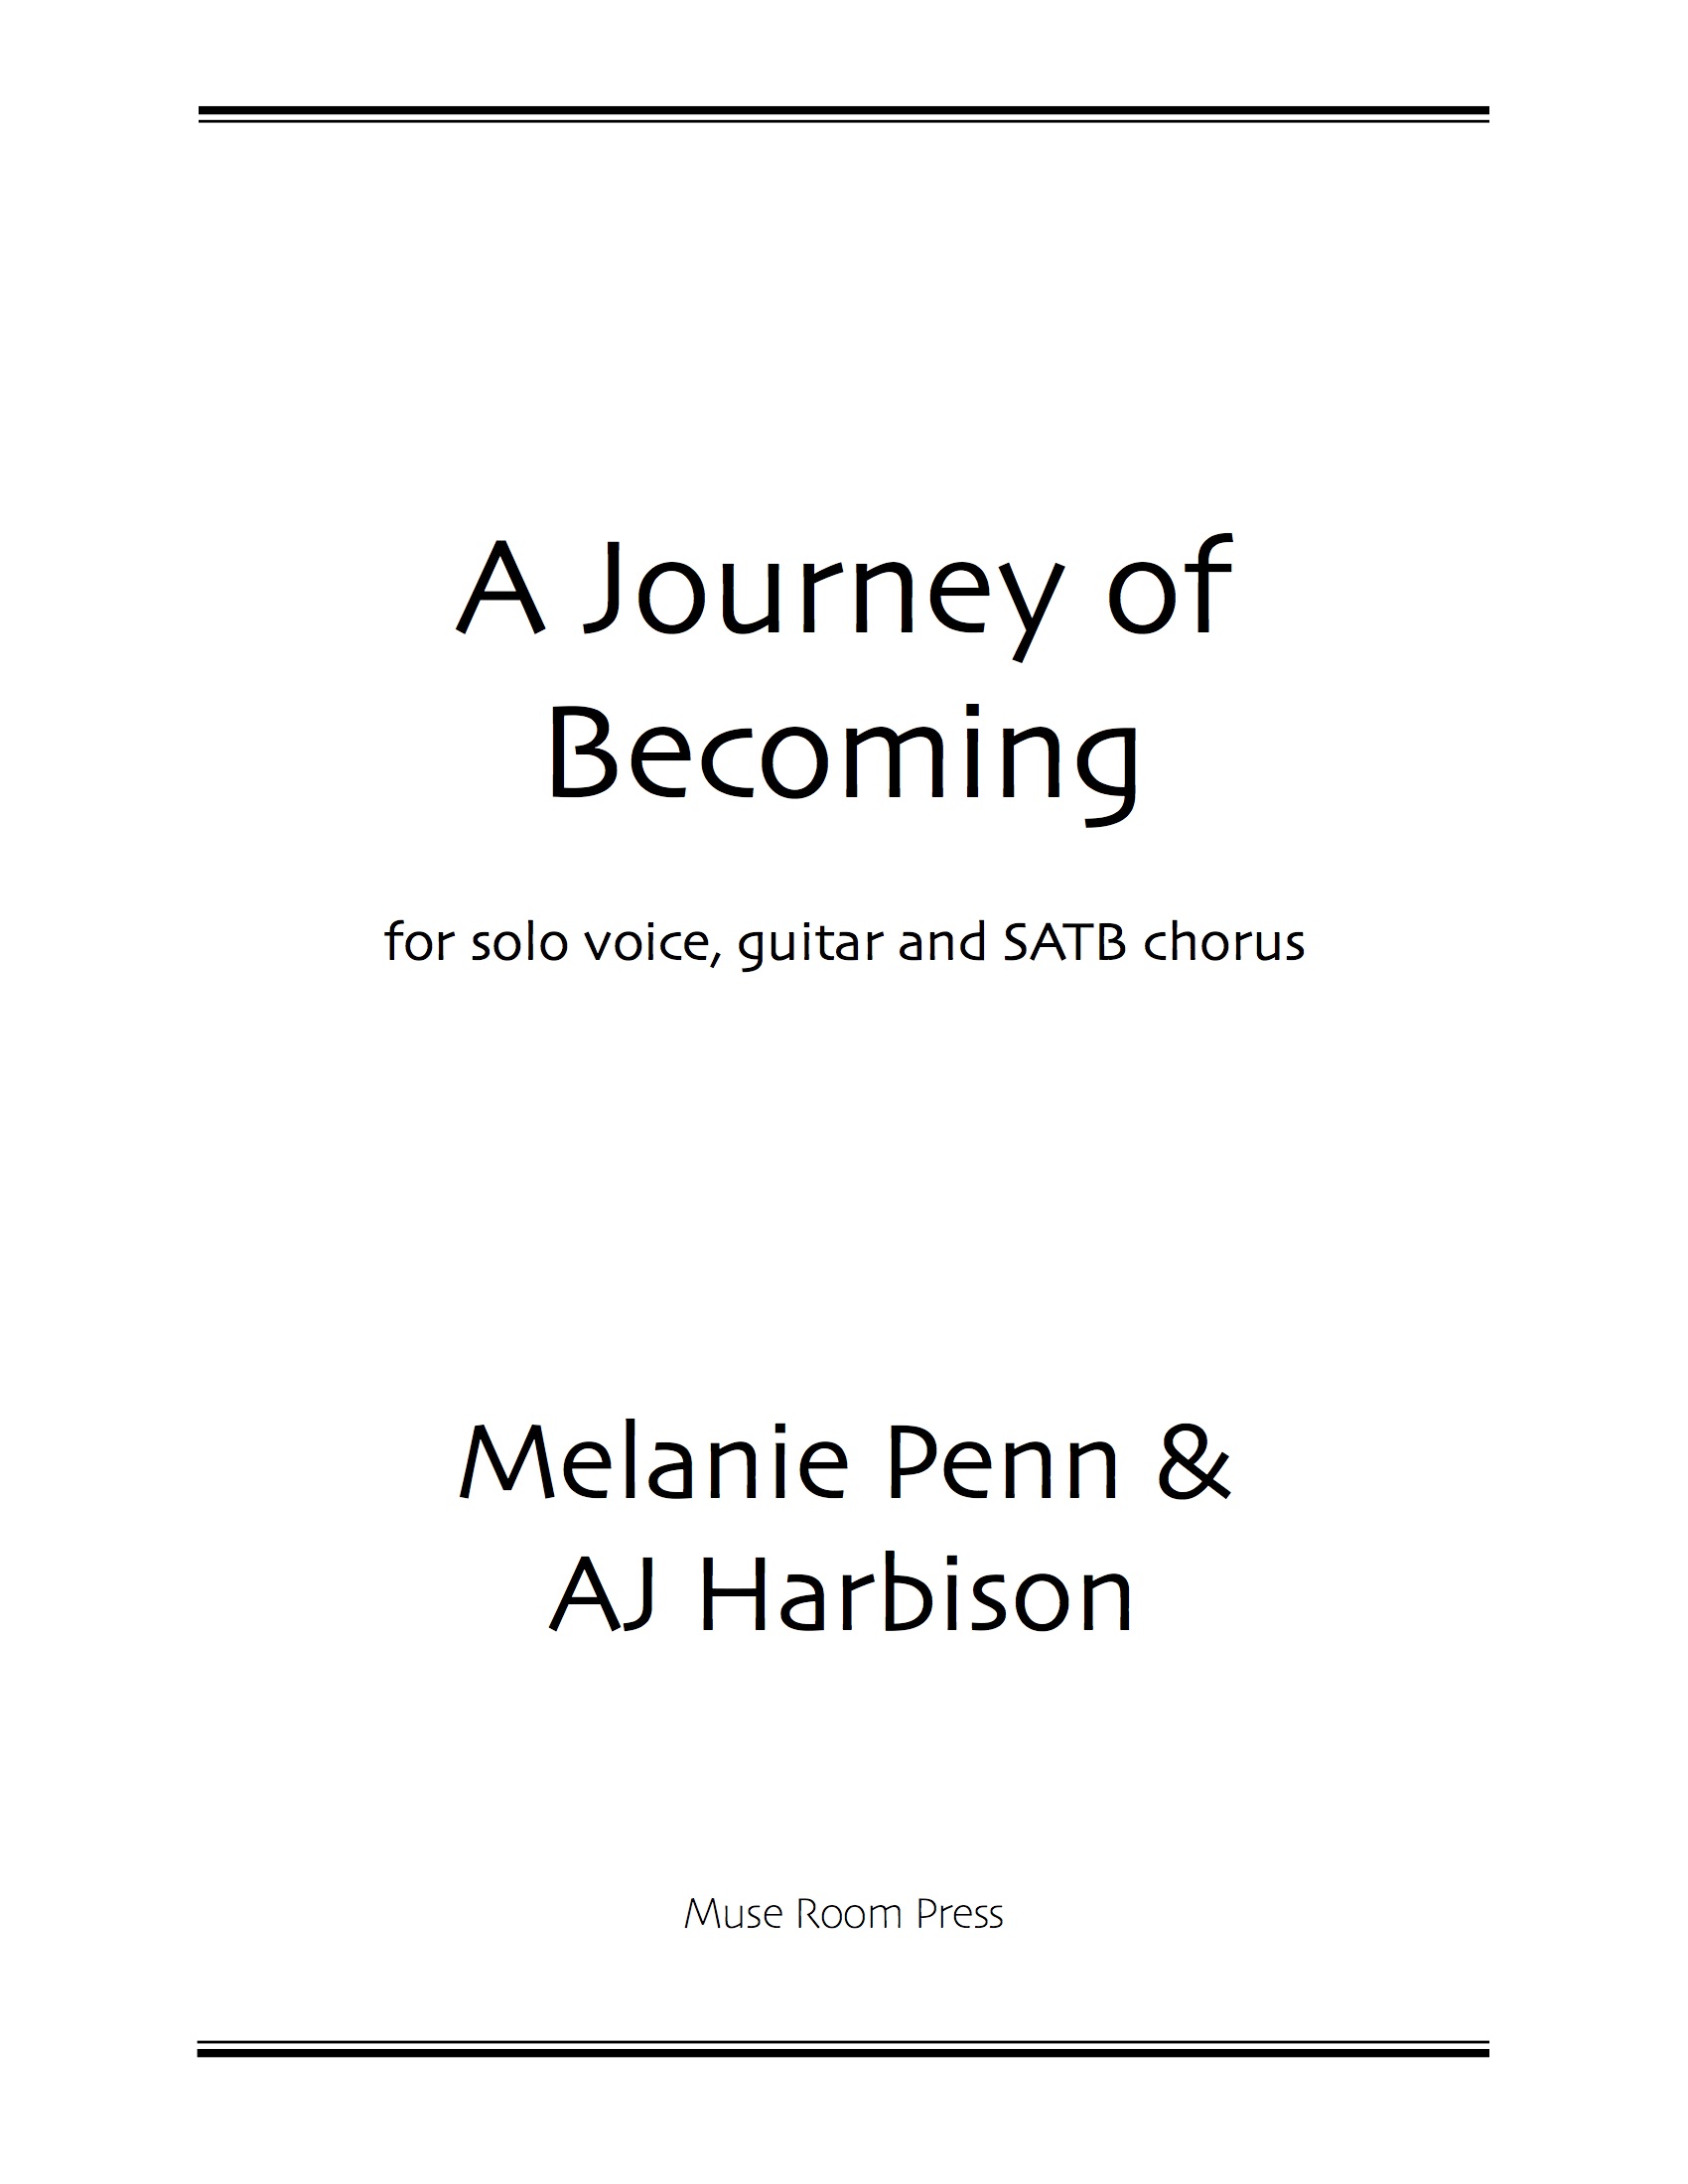 A Journey of Becoming